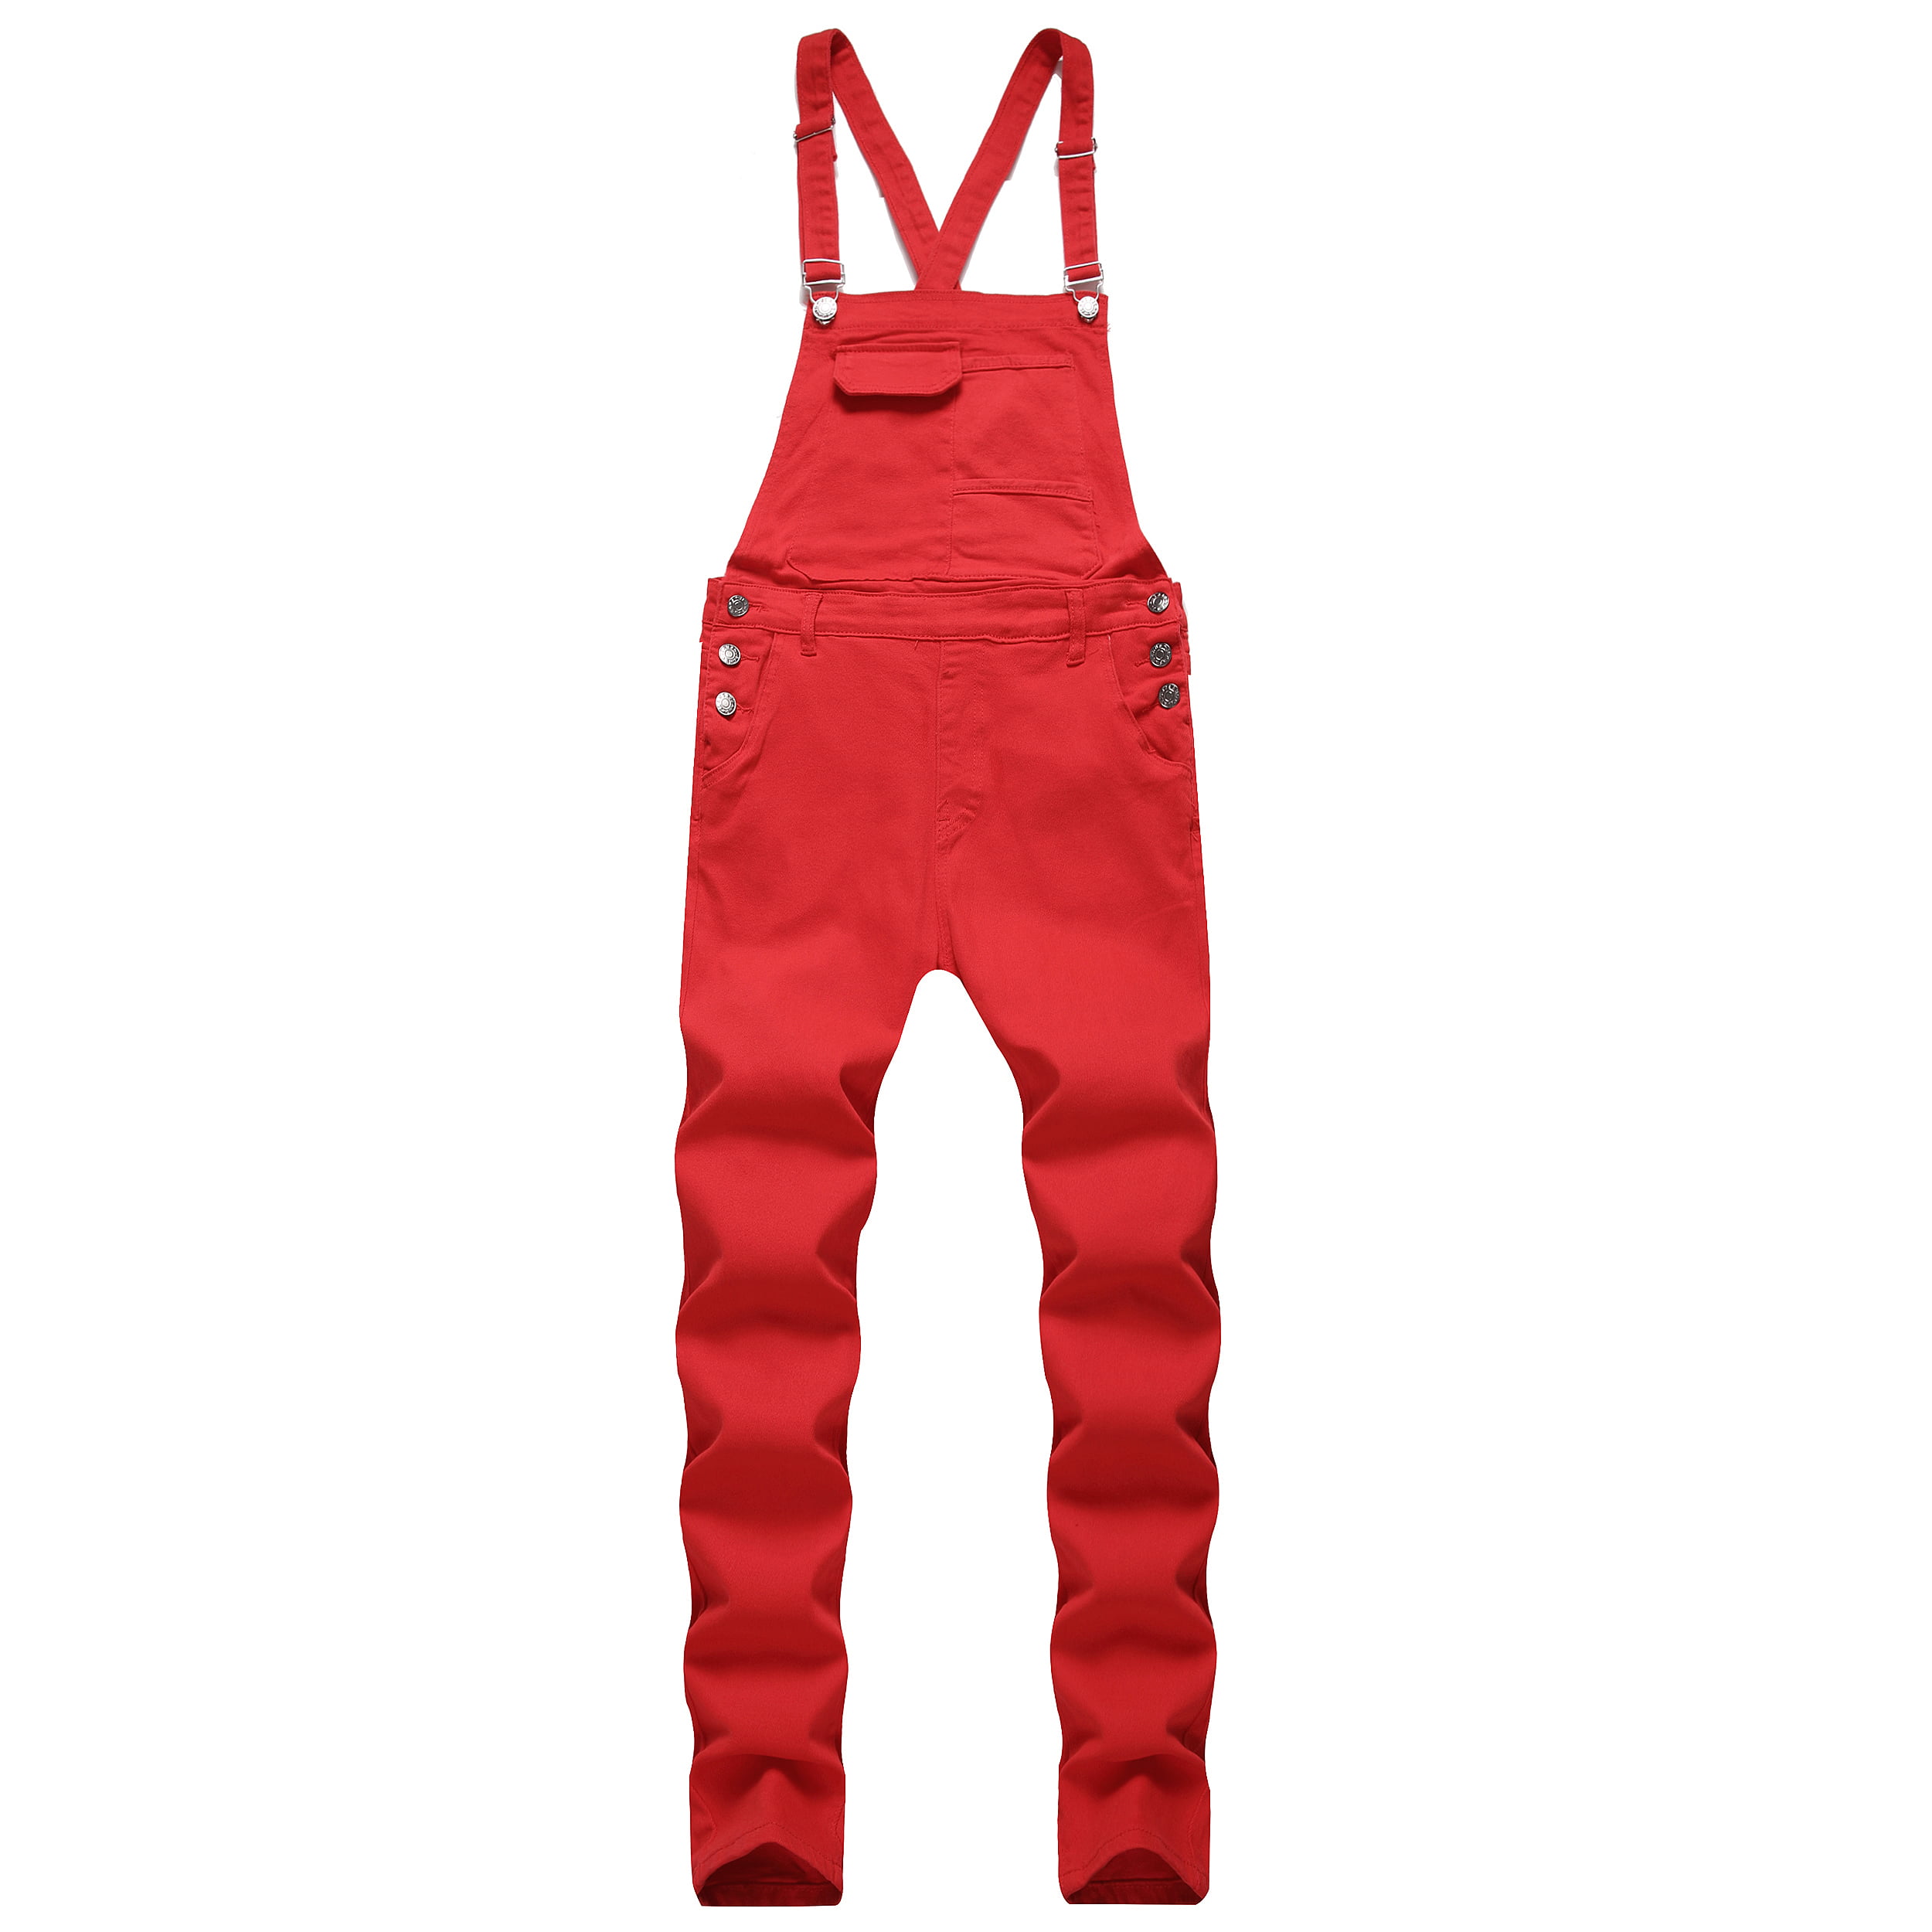 INCERUN Mens Casual Pants Slim Fit Jumpsuit Jeans Overalls Dungarees Trousers UK